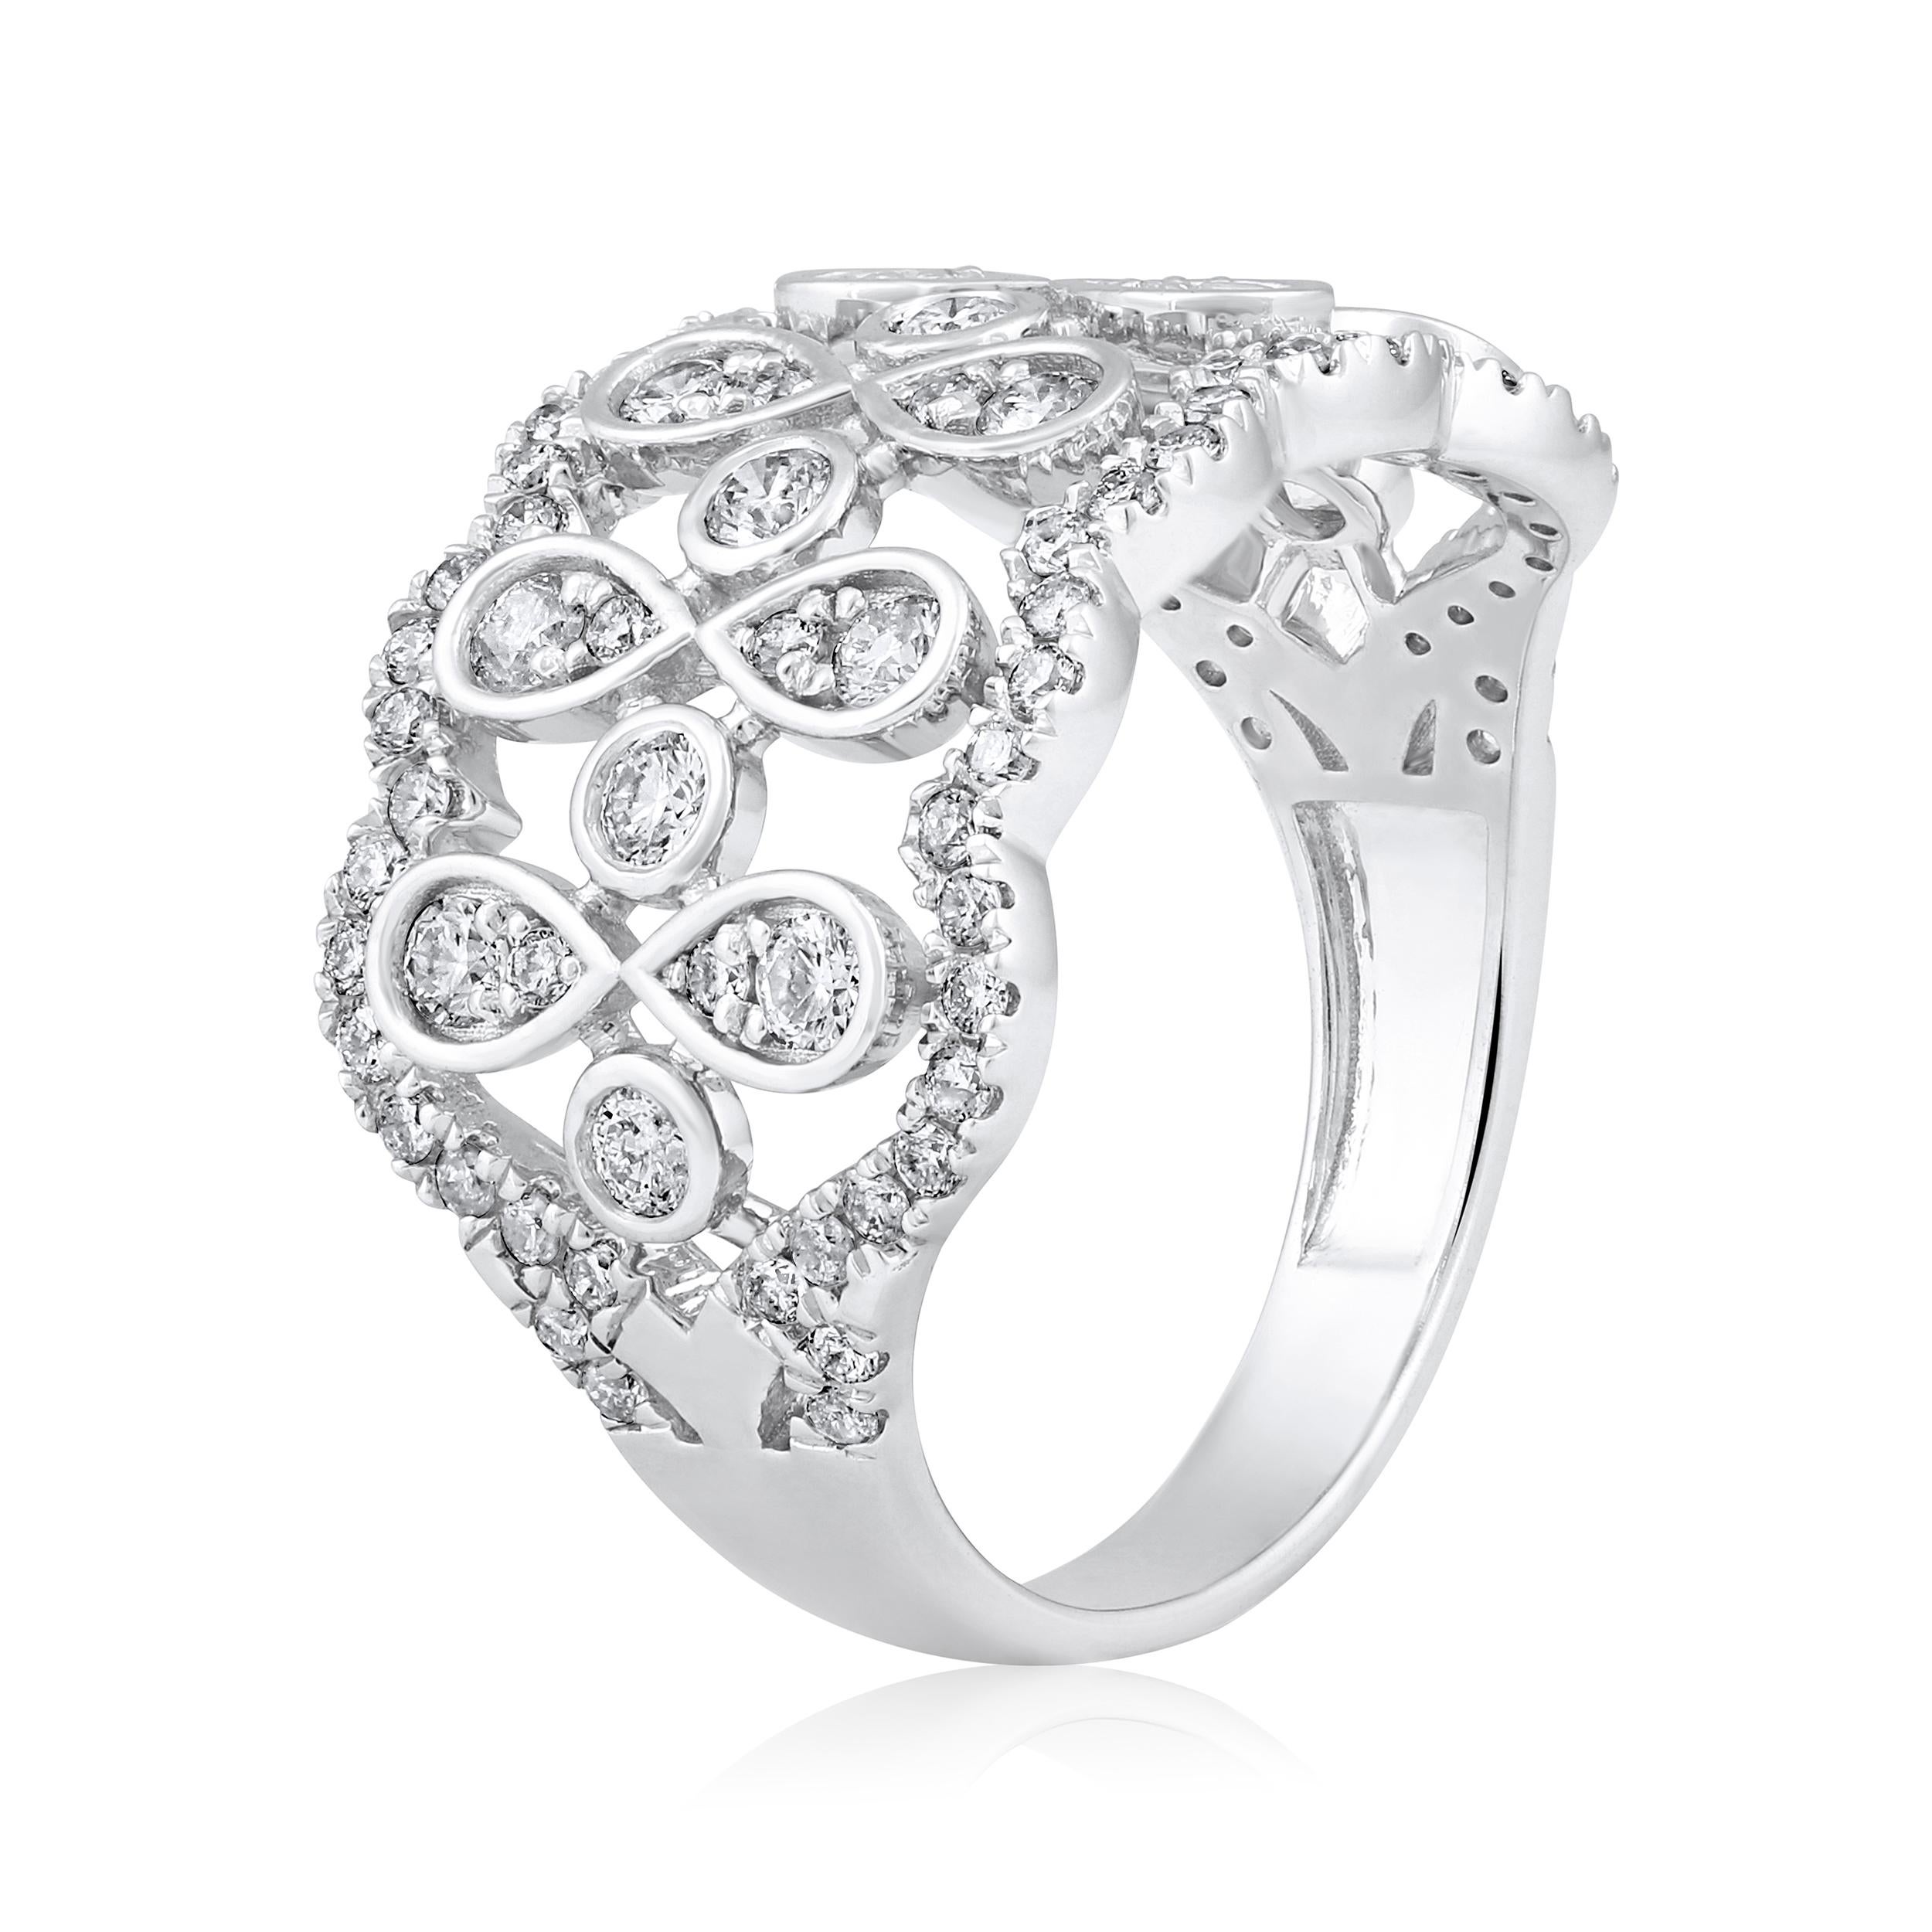 Ring Size: US 8 

Crafted in 5.65 grams of 14K White Gold, the ring contains 89 stones of Round Diamonds with a total of 1.15 carat in F-G color and I1-I2 clarity.

CONTEMPORARY AND TIMELESS ESSENCE: Crafted in 14-karat/18-karat with 100% natural